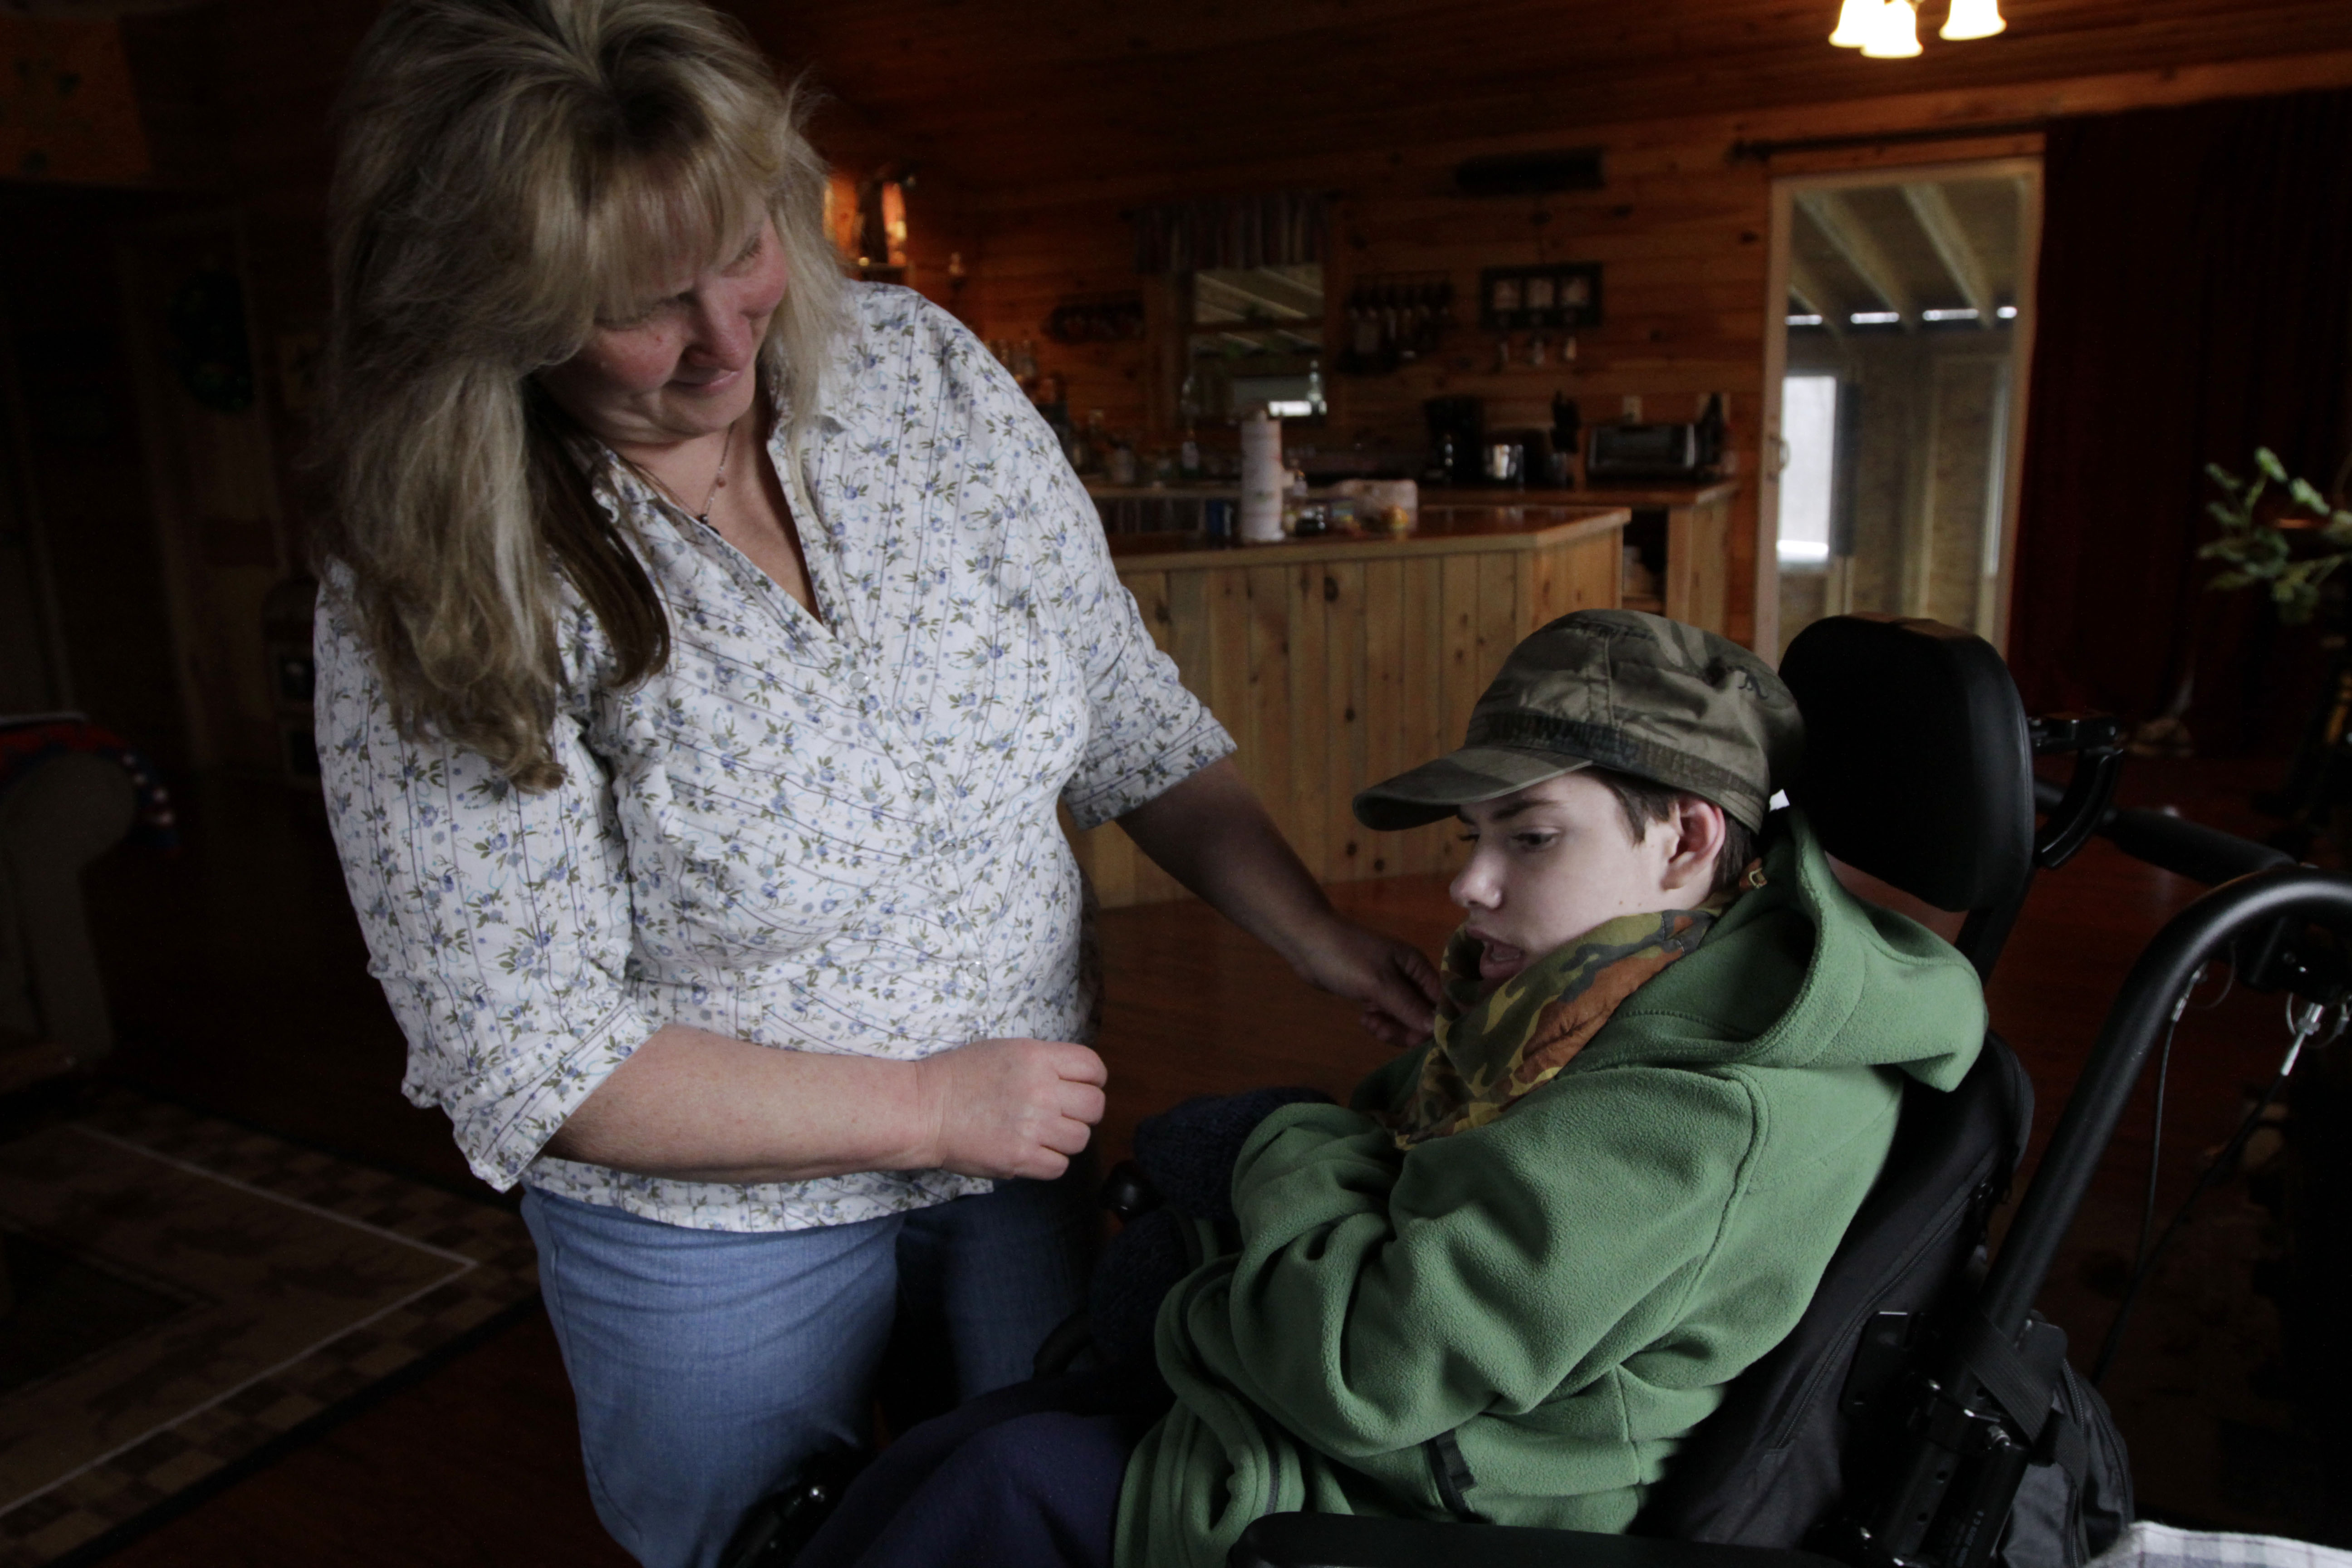 Ethan Kelly, age 21, who has cerebral palsy, gets help from his mother. AP File Photo/Pat Wellenbach.